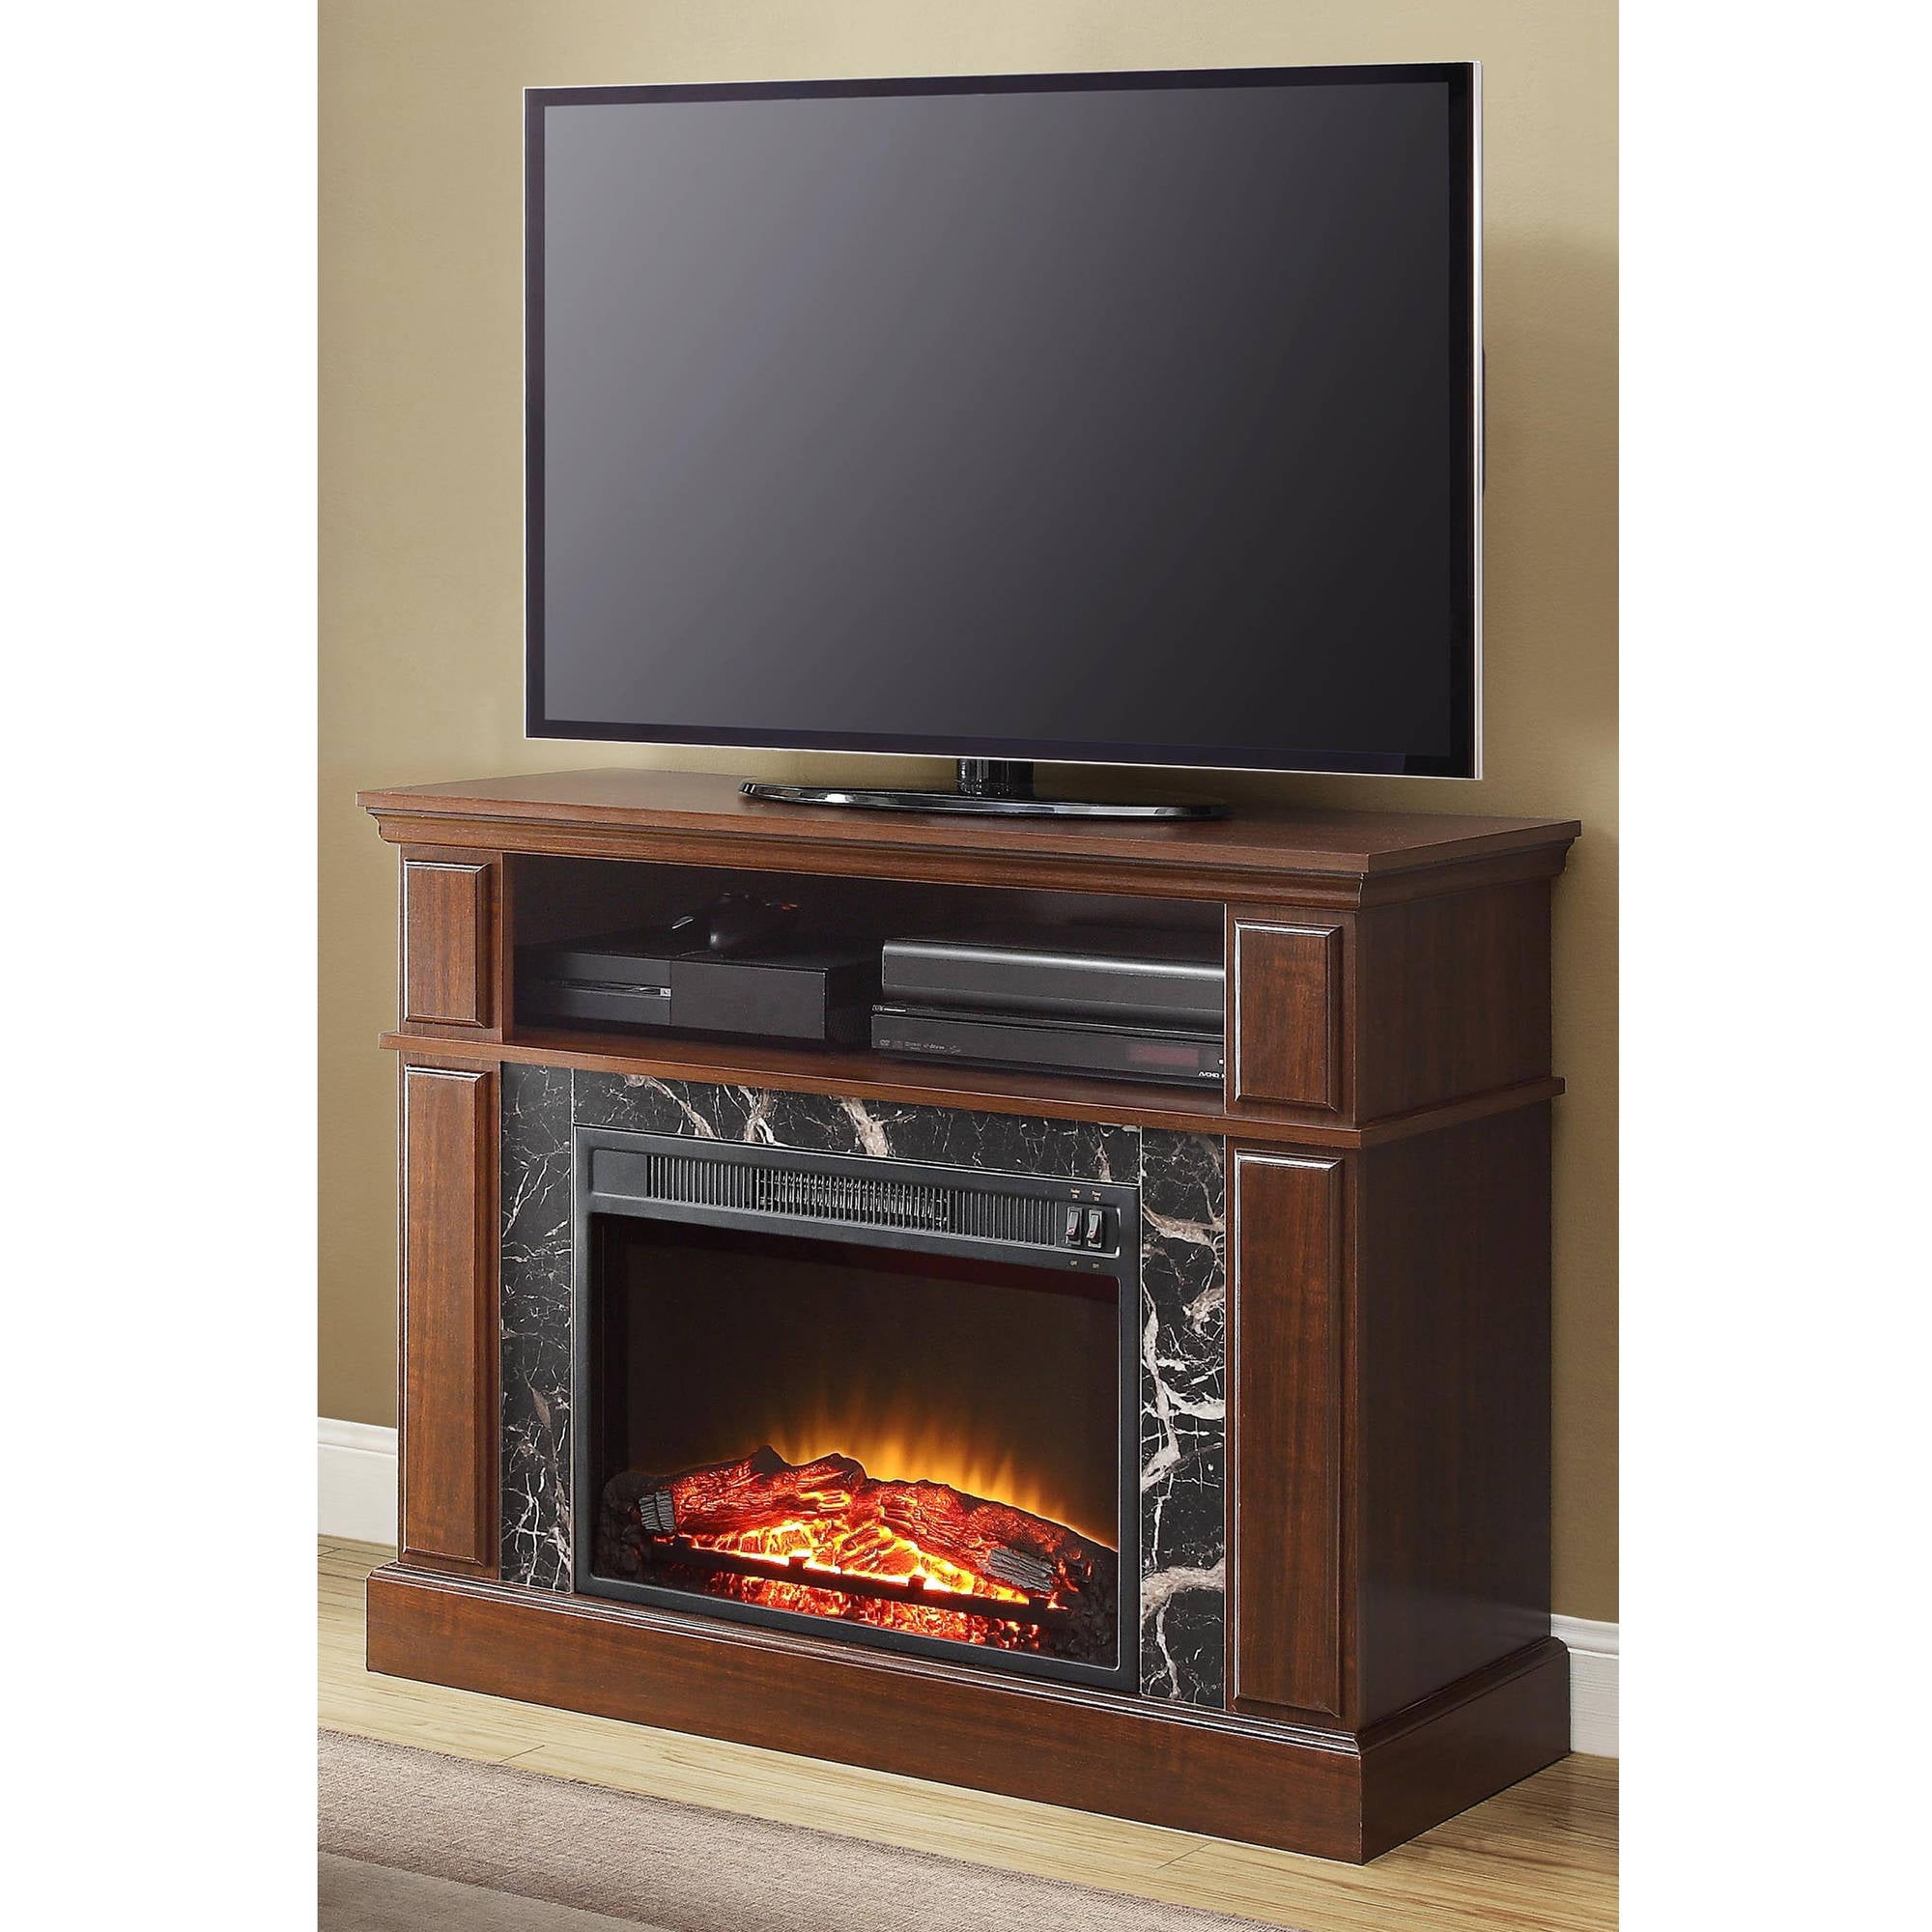 Free Shipping. Buy Whalen 41" Cherry Media Fireplace for TVs up to 50" at Walmart.com